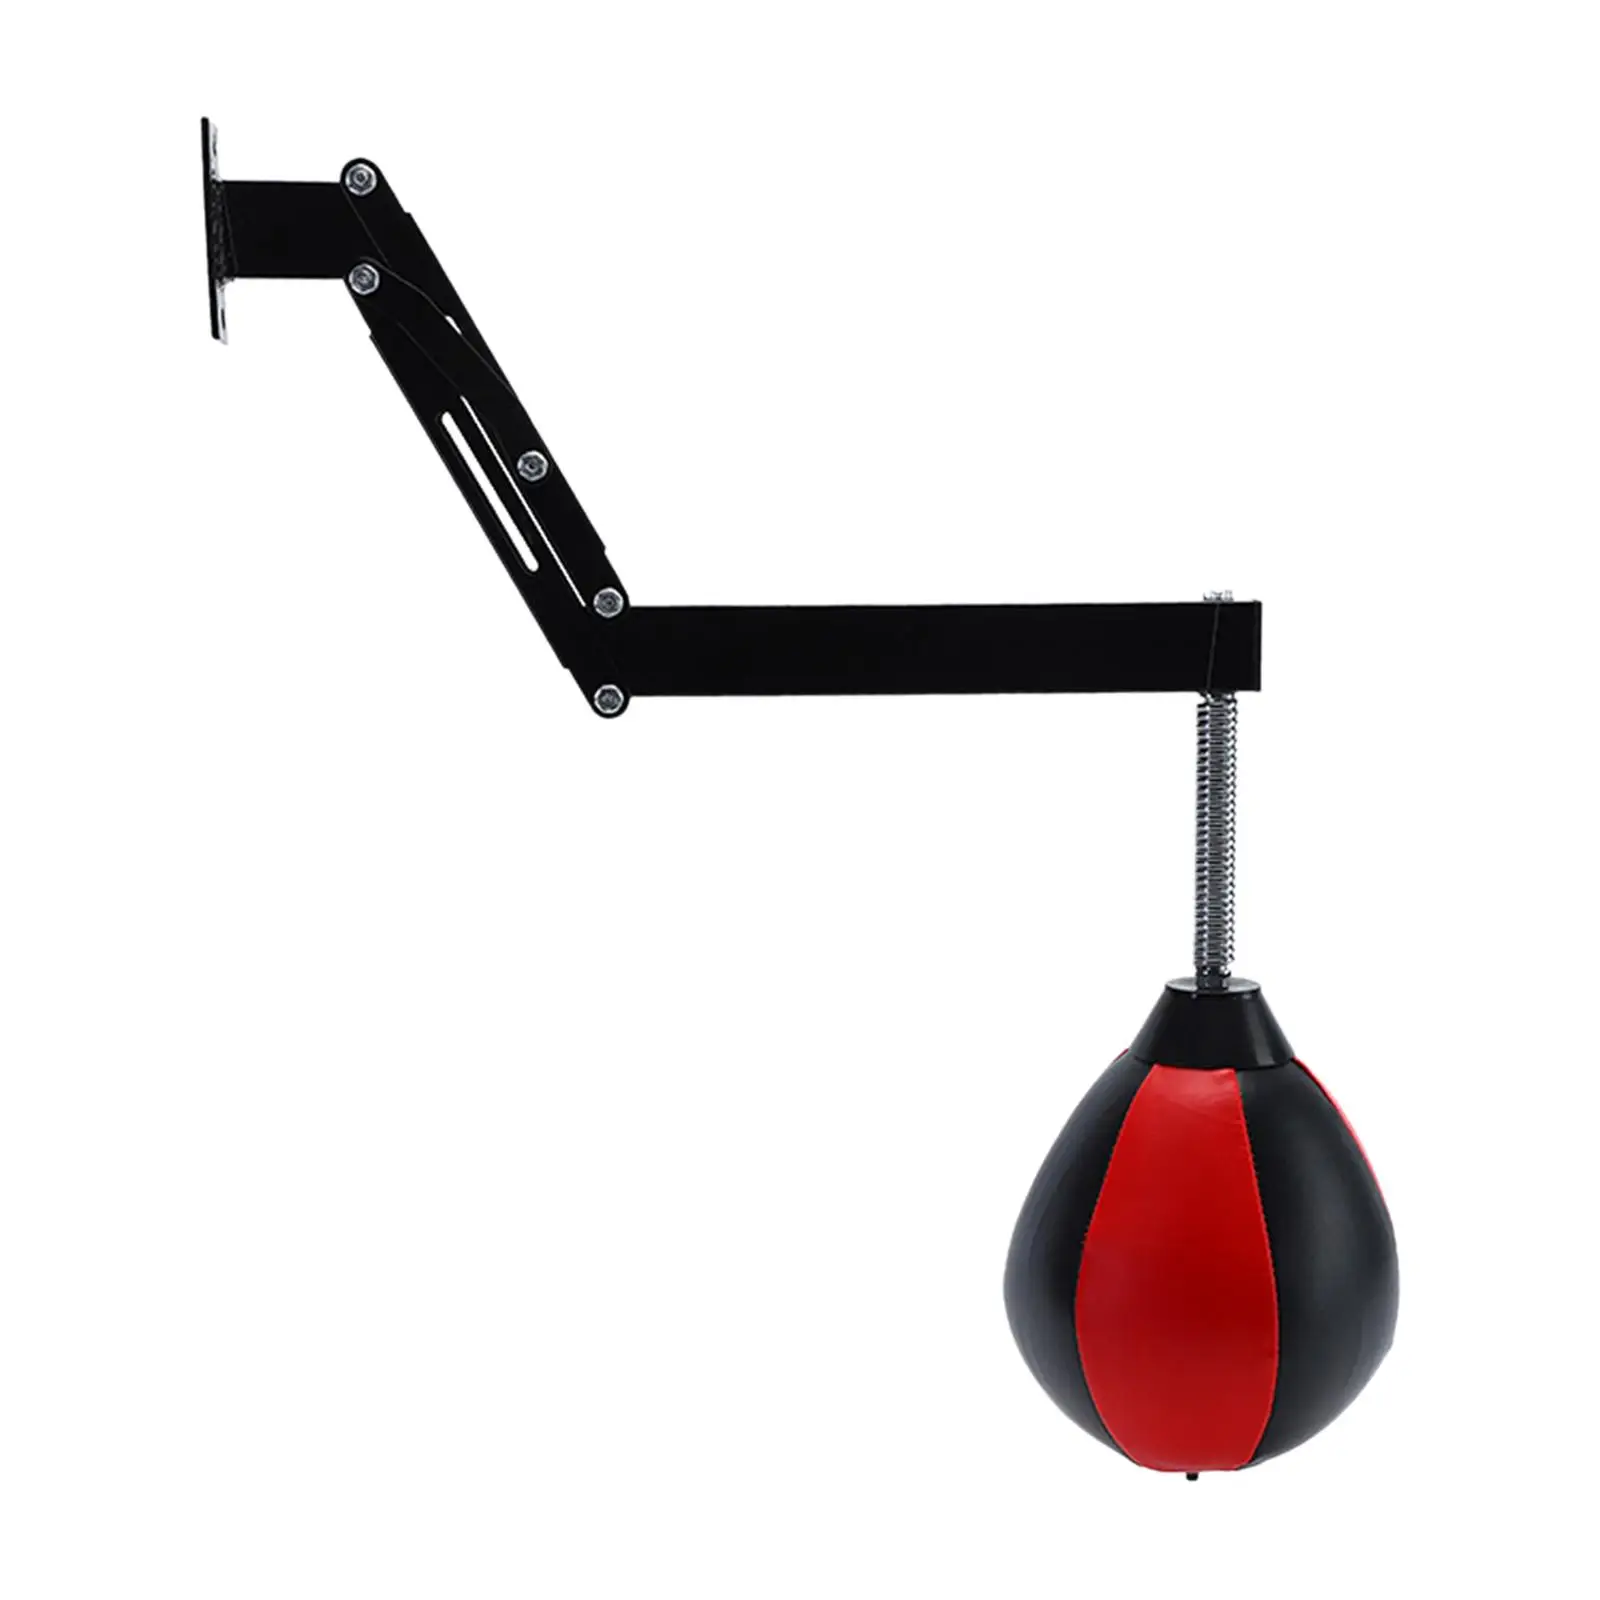 Speed Bag Inflatable Adjustable Wall Mount Heavy Duty PU Leather Boxing Punching Bag for Exercise Fitness Workout Kids Adult